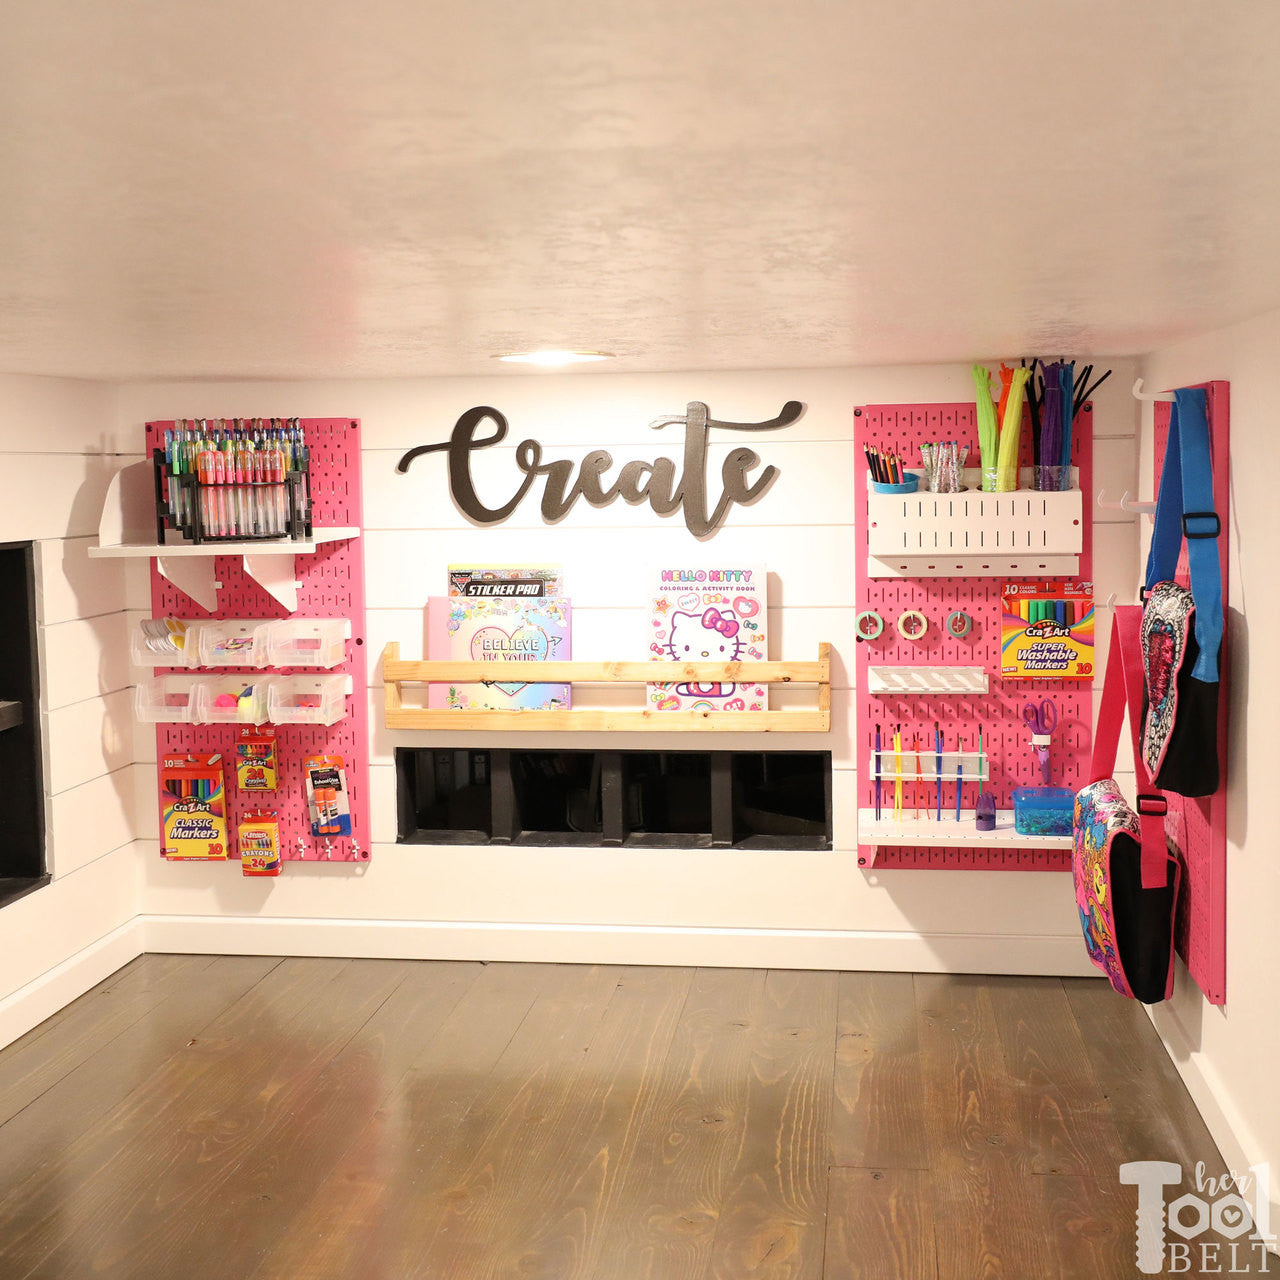 Her Tool Belt - Basement Playhouse with Pink Pegboards